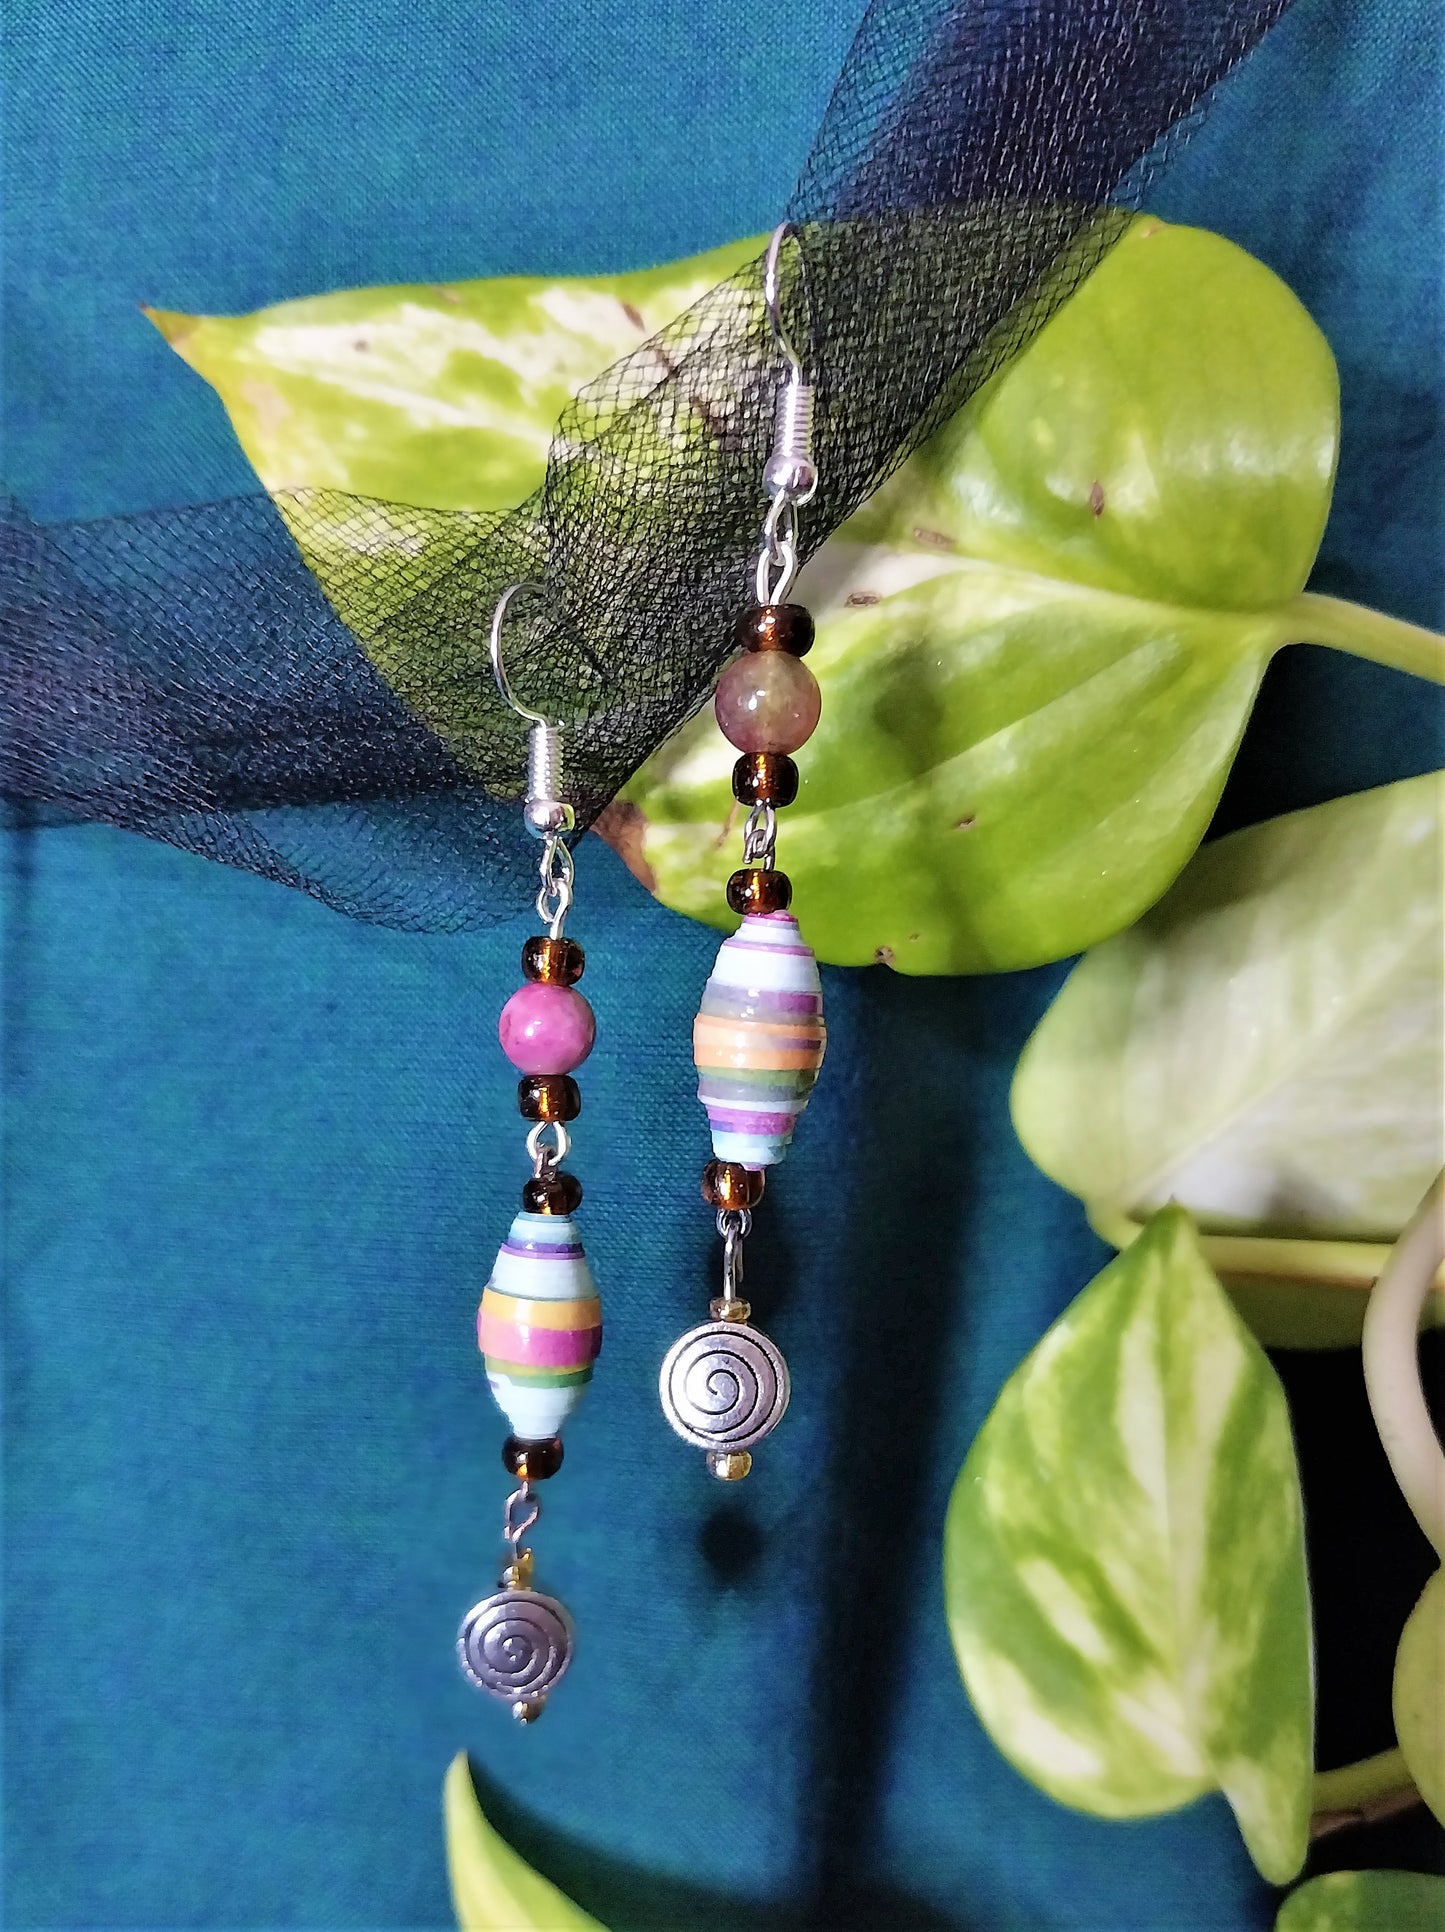 Spiral Earrings With Multicolored Handmade Paper Beads